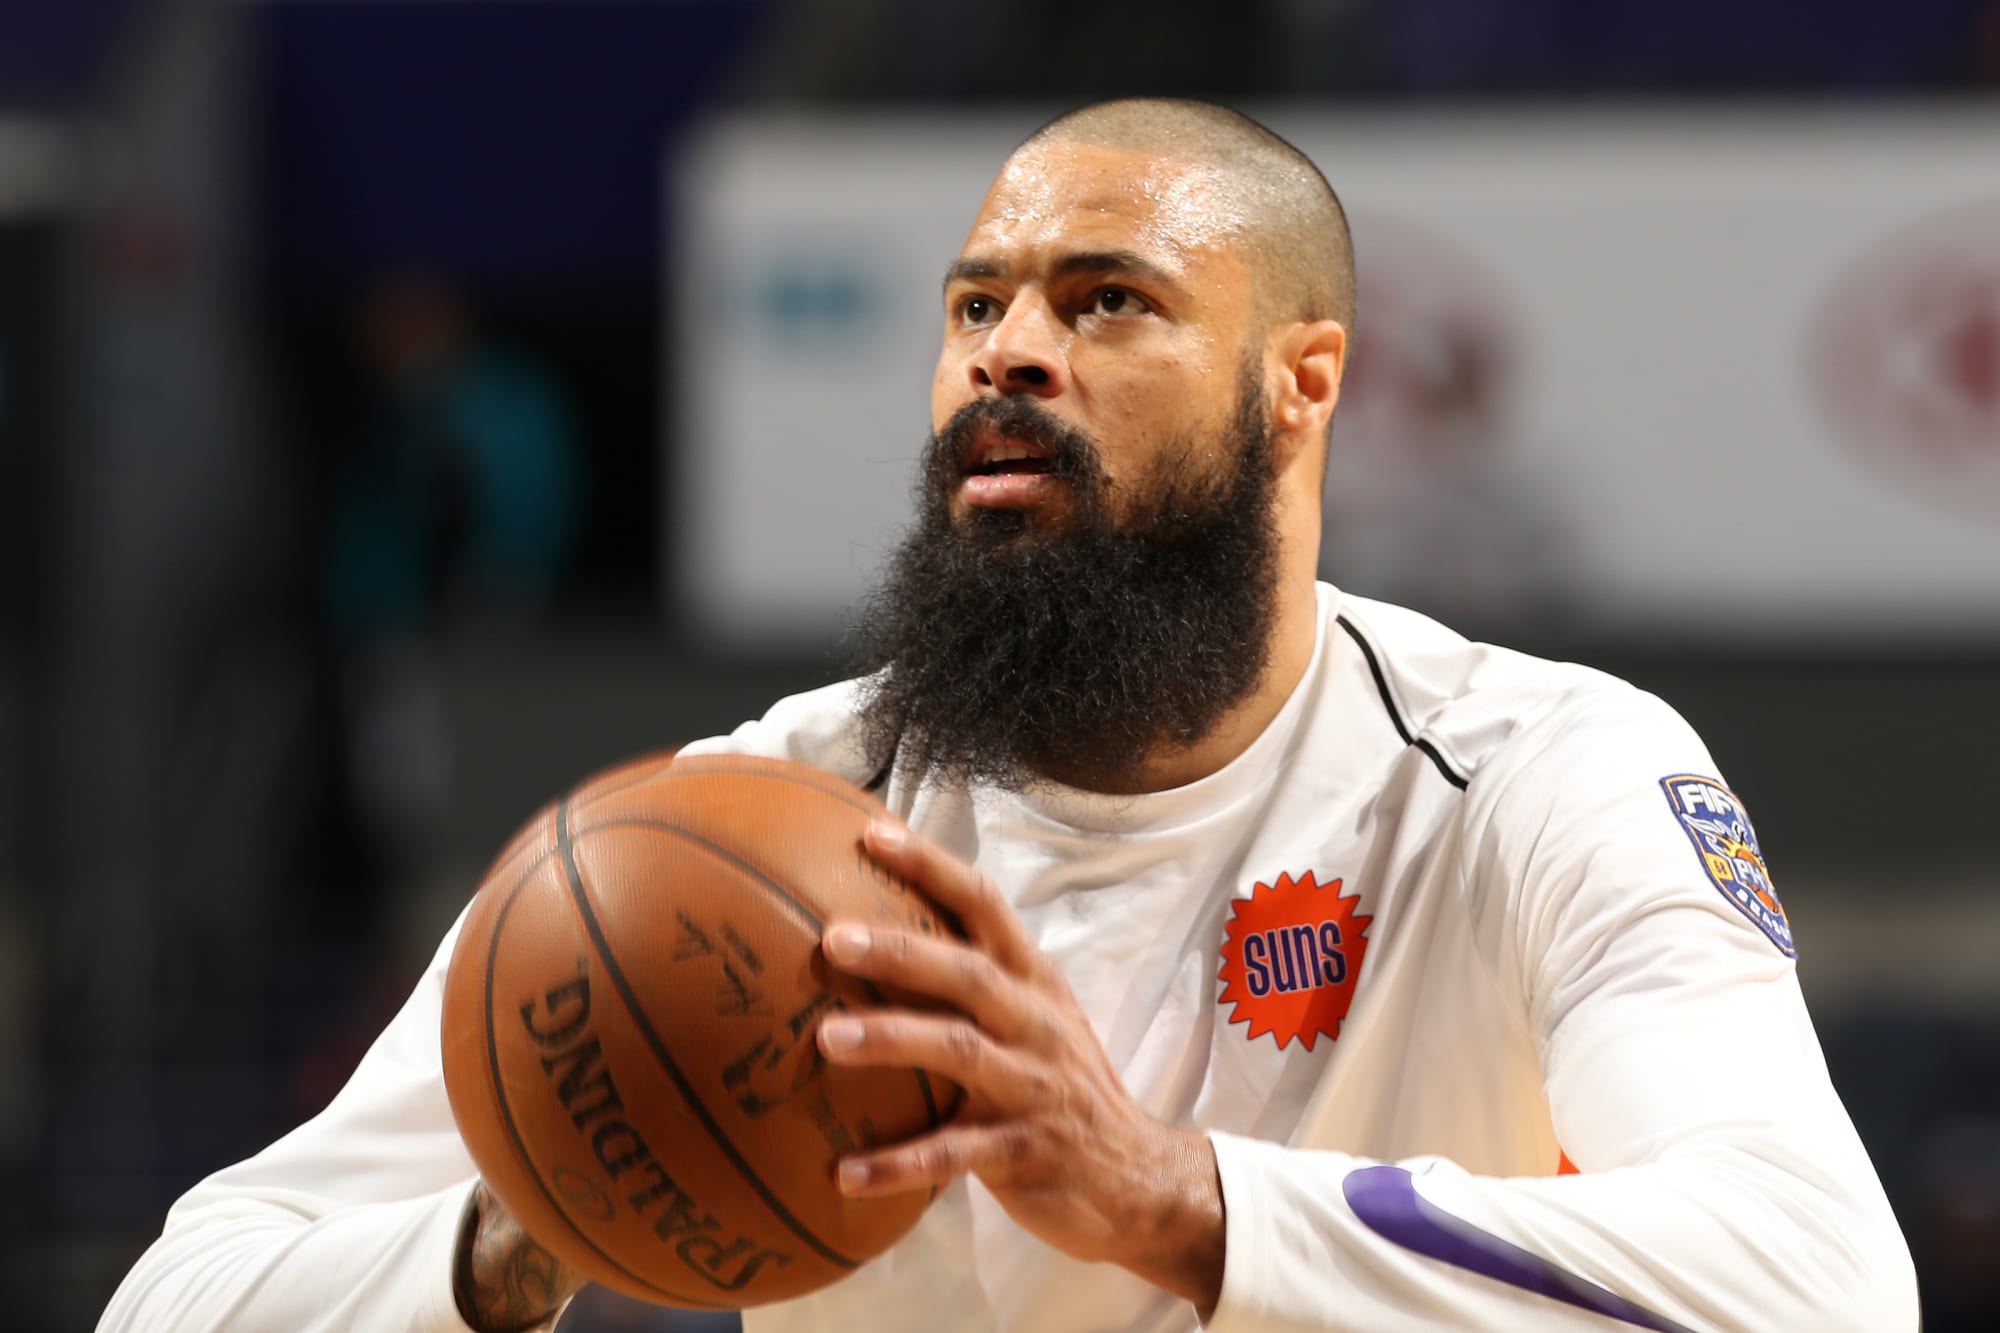 Reports: Tyson Chandler expected to sign with Lakers after Suns